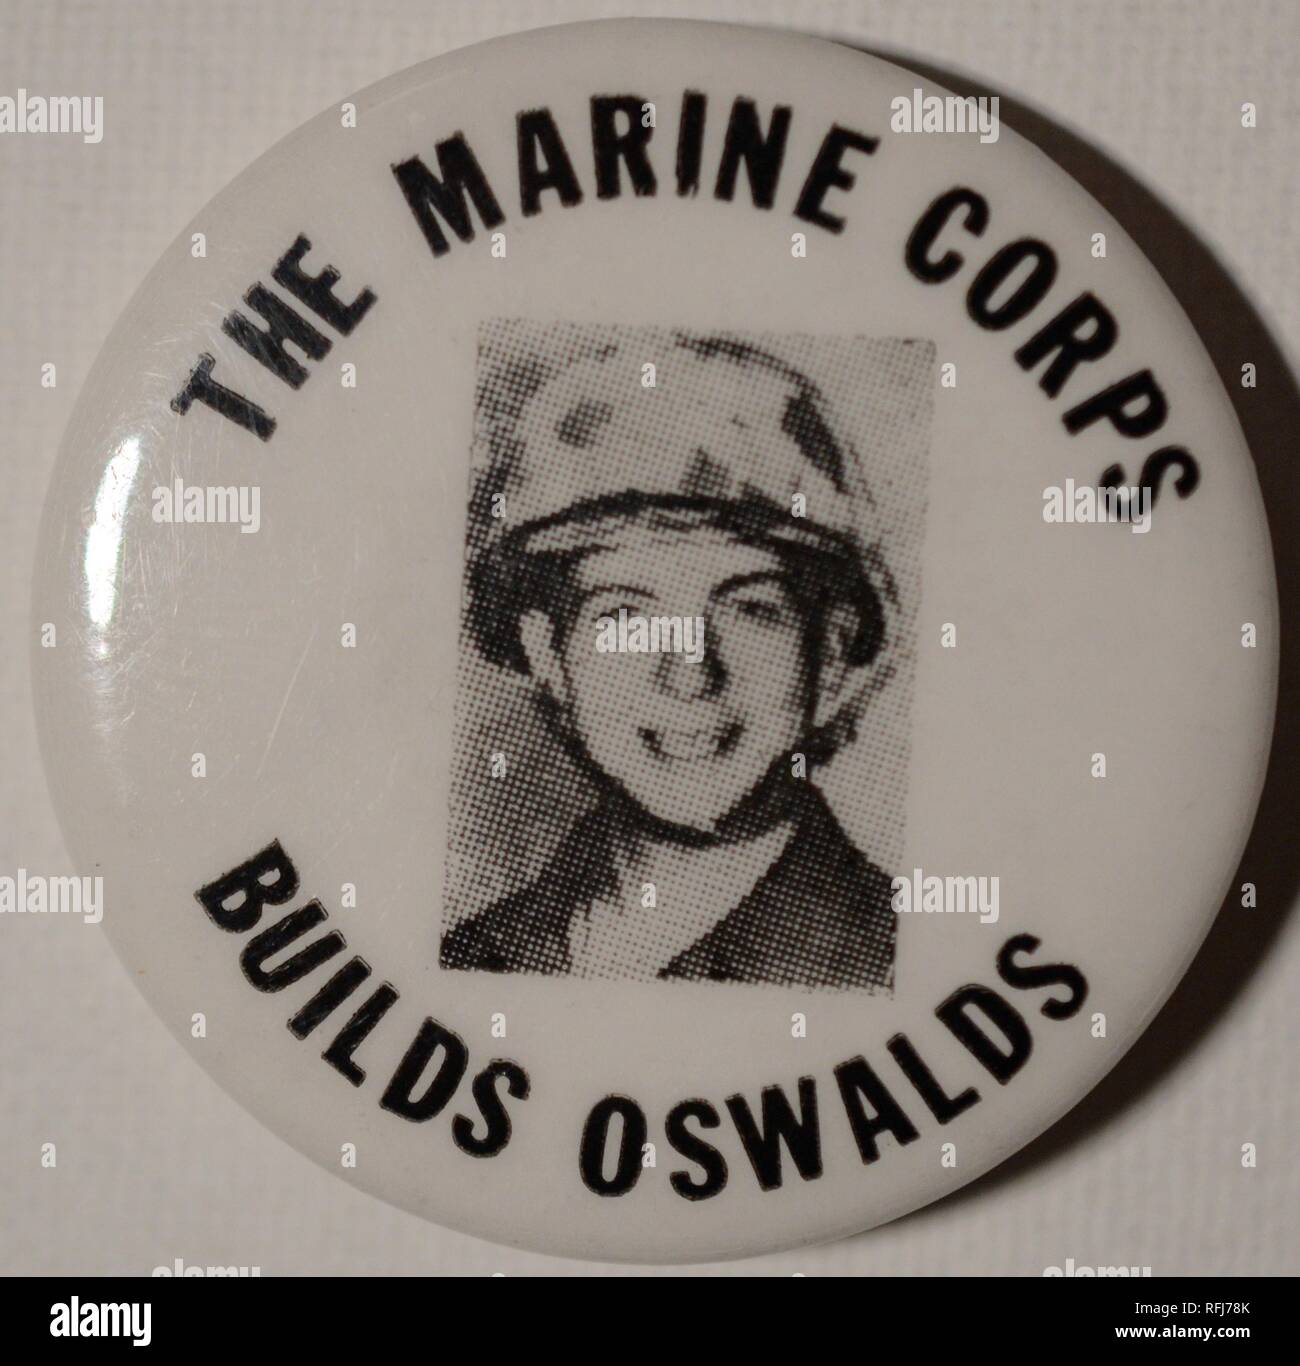 Black and white anti-war pin or button with a headshot of President John F Kennedy's assassinator, Lee Harvey Oswald, wearing a helmet and uniform, and smiling at the camera, during his posting with the United States Marine Corps, encircled by the text 'The Marine Corps Builds Oswalds', issued during the Vietnam War, 1965. () Stock Photo